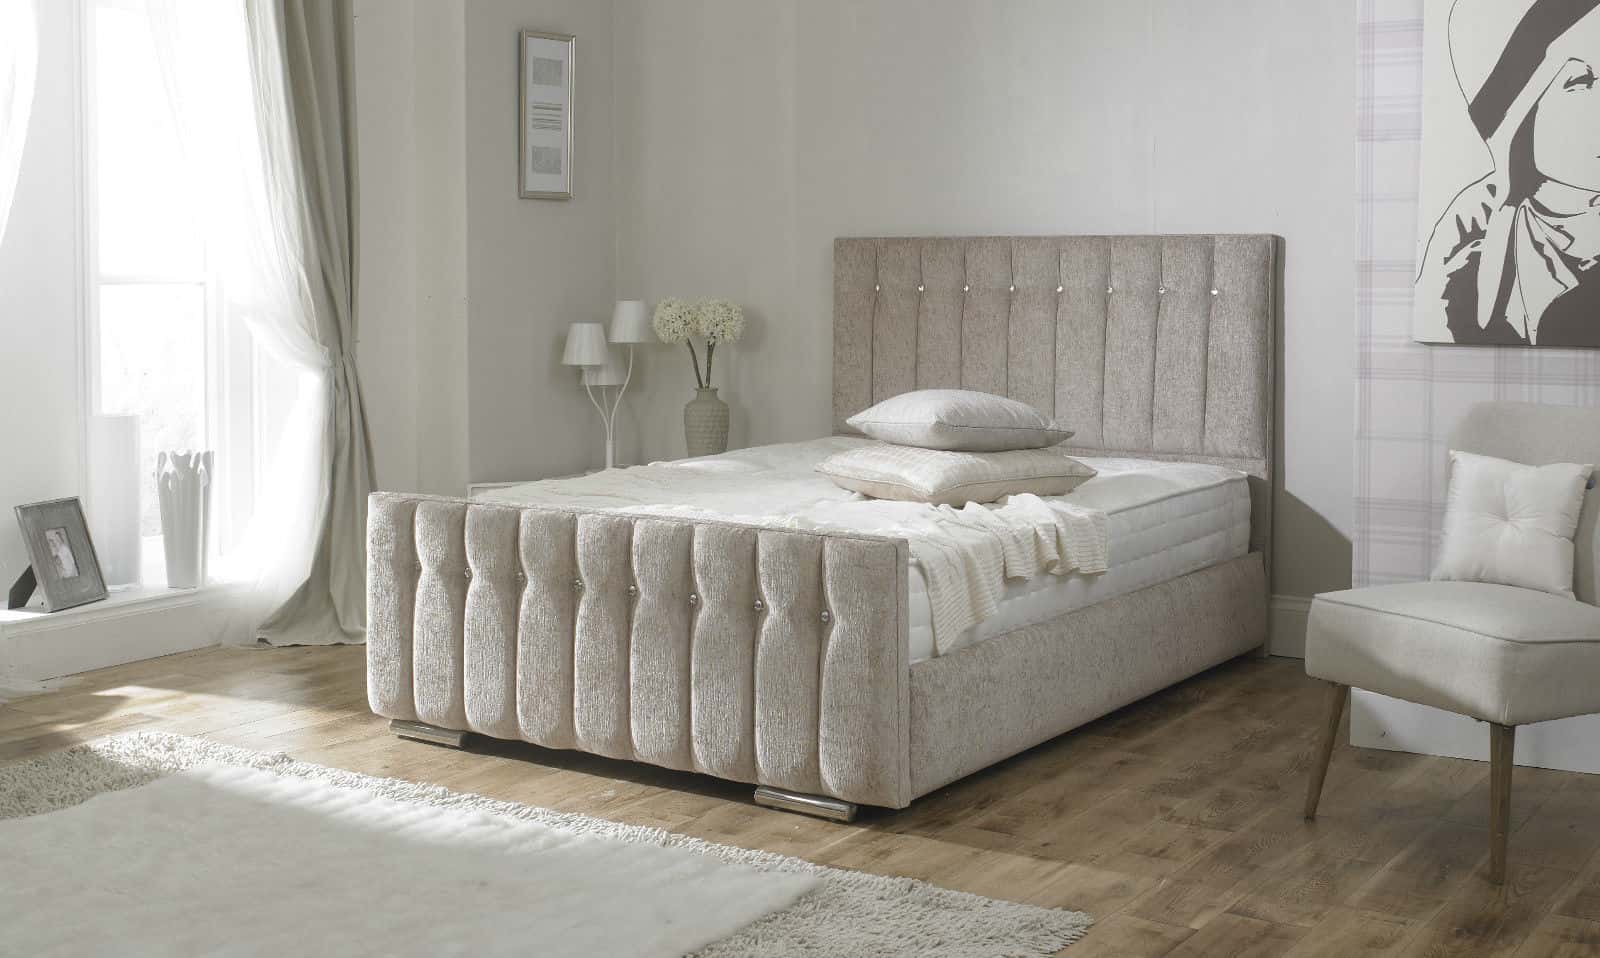 Florence-Lined-Diamond-Bed-Frame-Sleigh-Bed-Ottoman-Storage-Bed-Frame-Matching-Footboard-Fabric-Buttonn-Crushed-Velvet-Chenille-Plush-Velvet